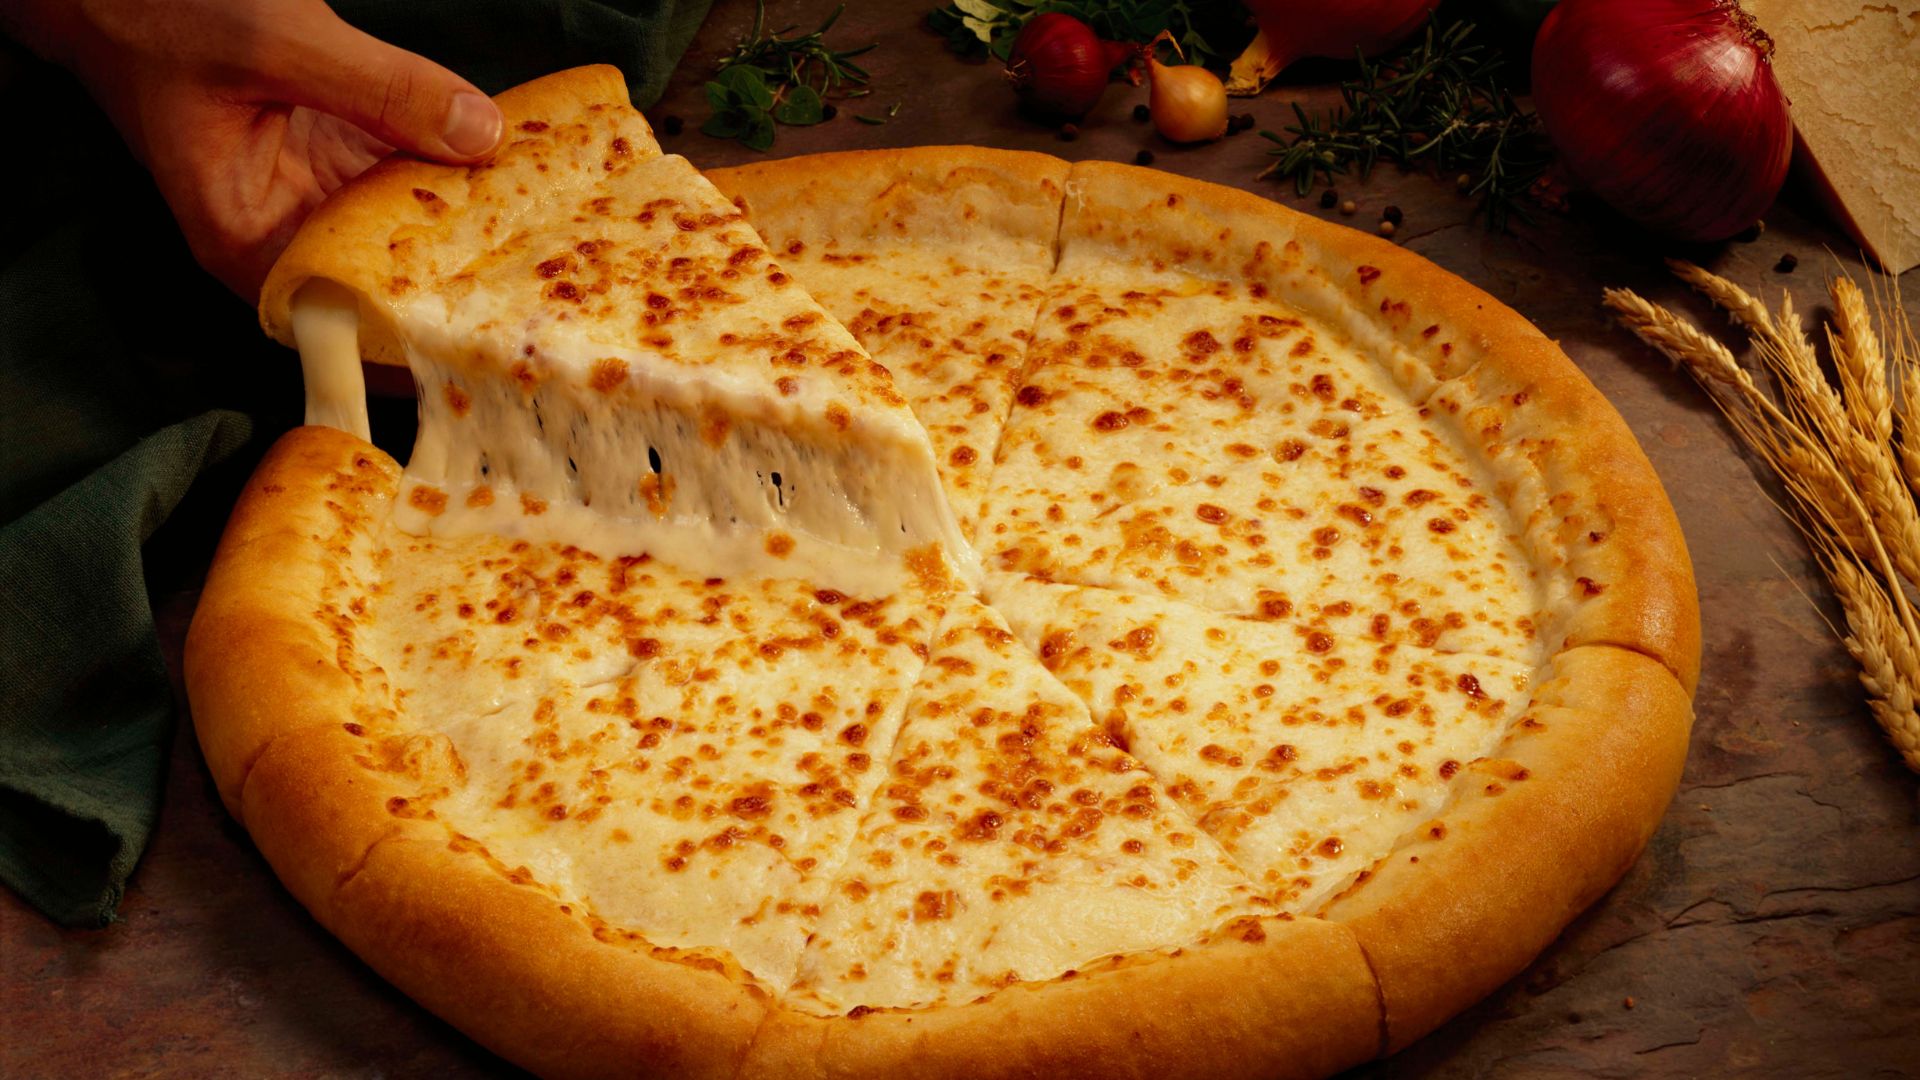 How Many Calories In A Slice Of Cheese Pizza